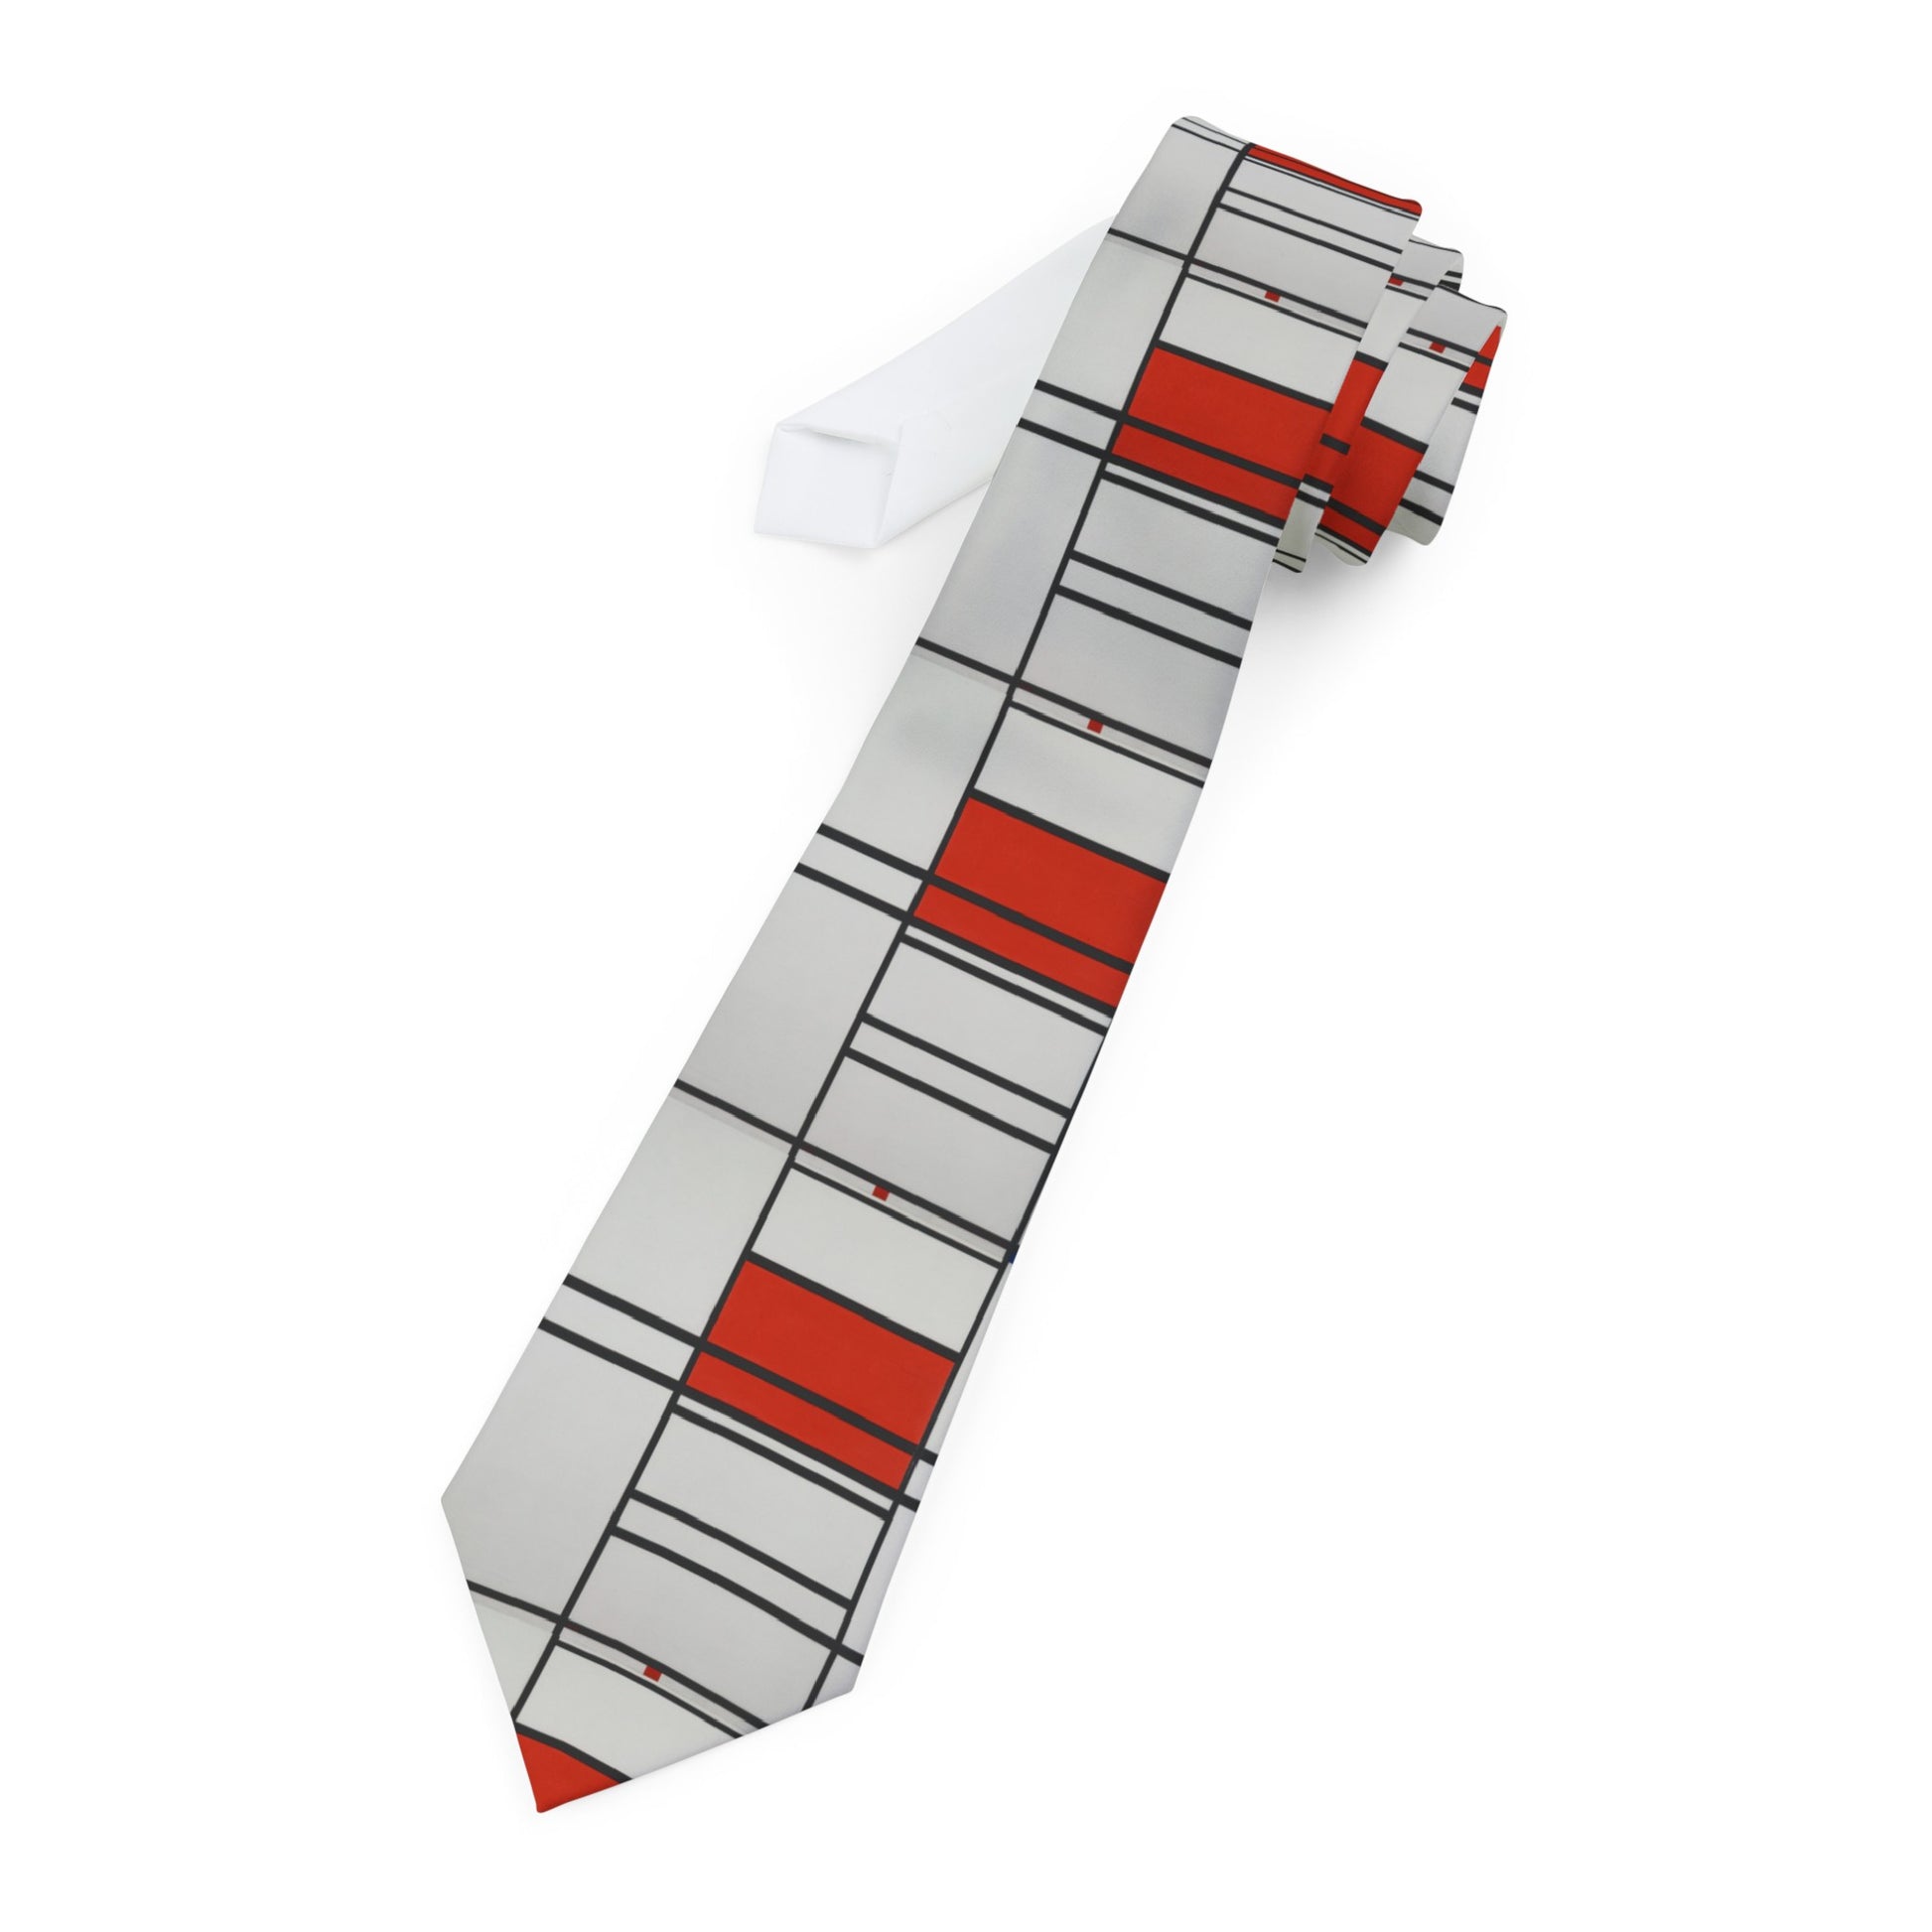 PIET MONDRIAN - COMPOSITION OF RED AND WHITE - ART TIE - CLASSIC!